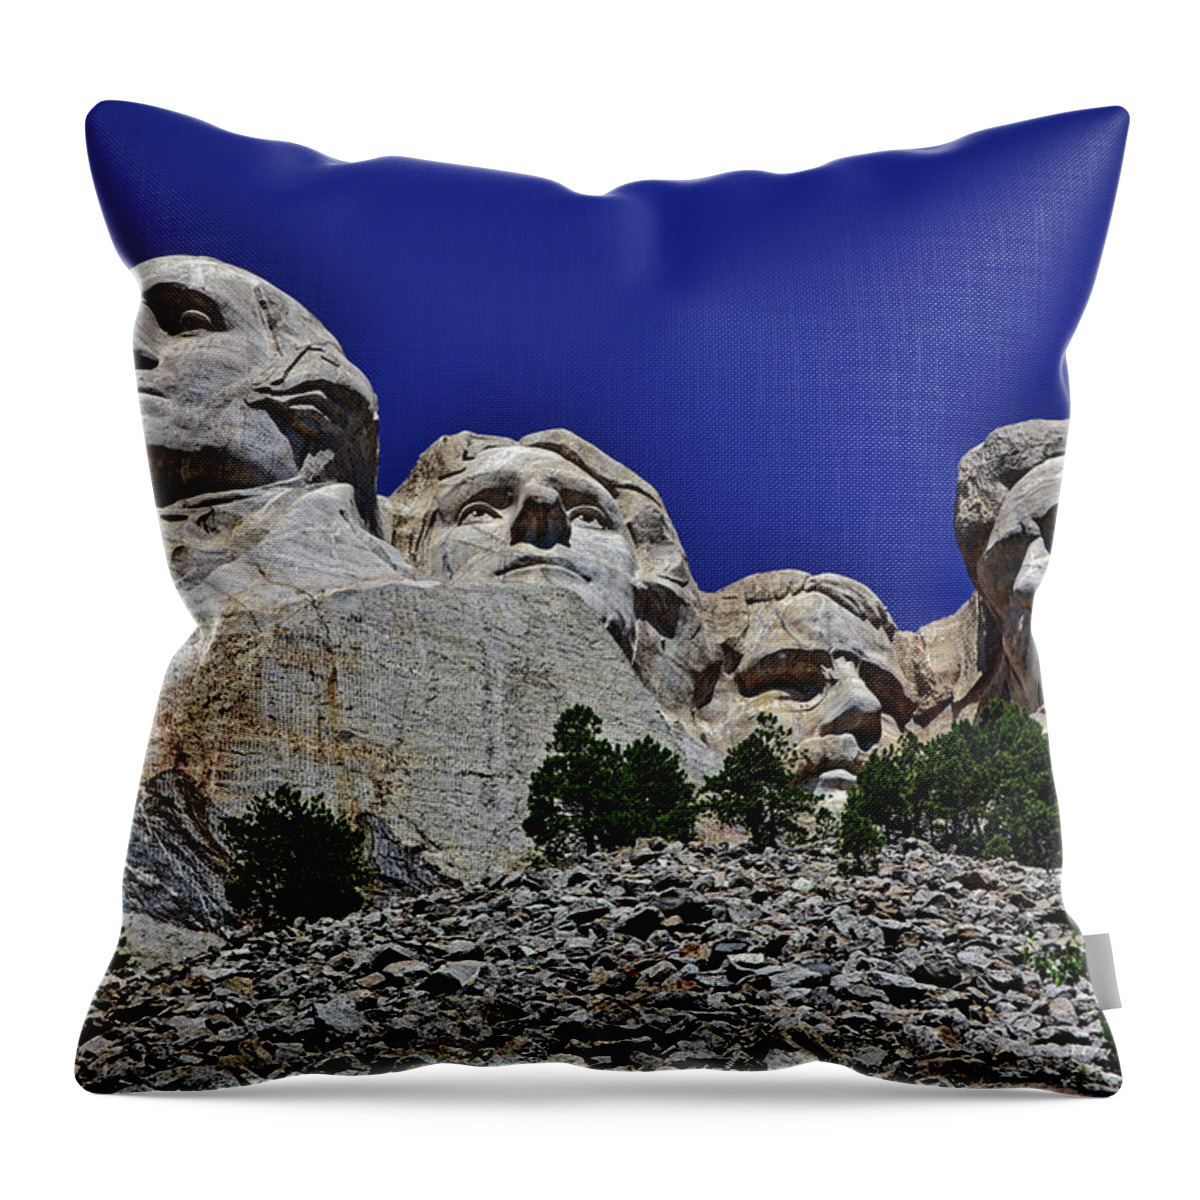 Mount Rushmore Throw Pillow featuring the photograph Mount Rushmore 007 by George Bostian